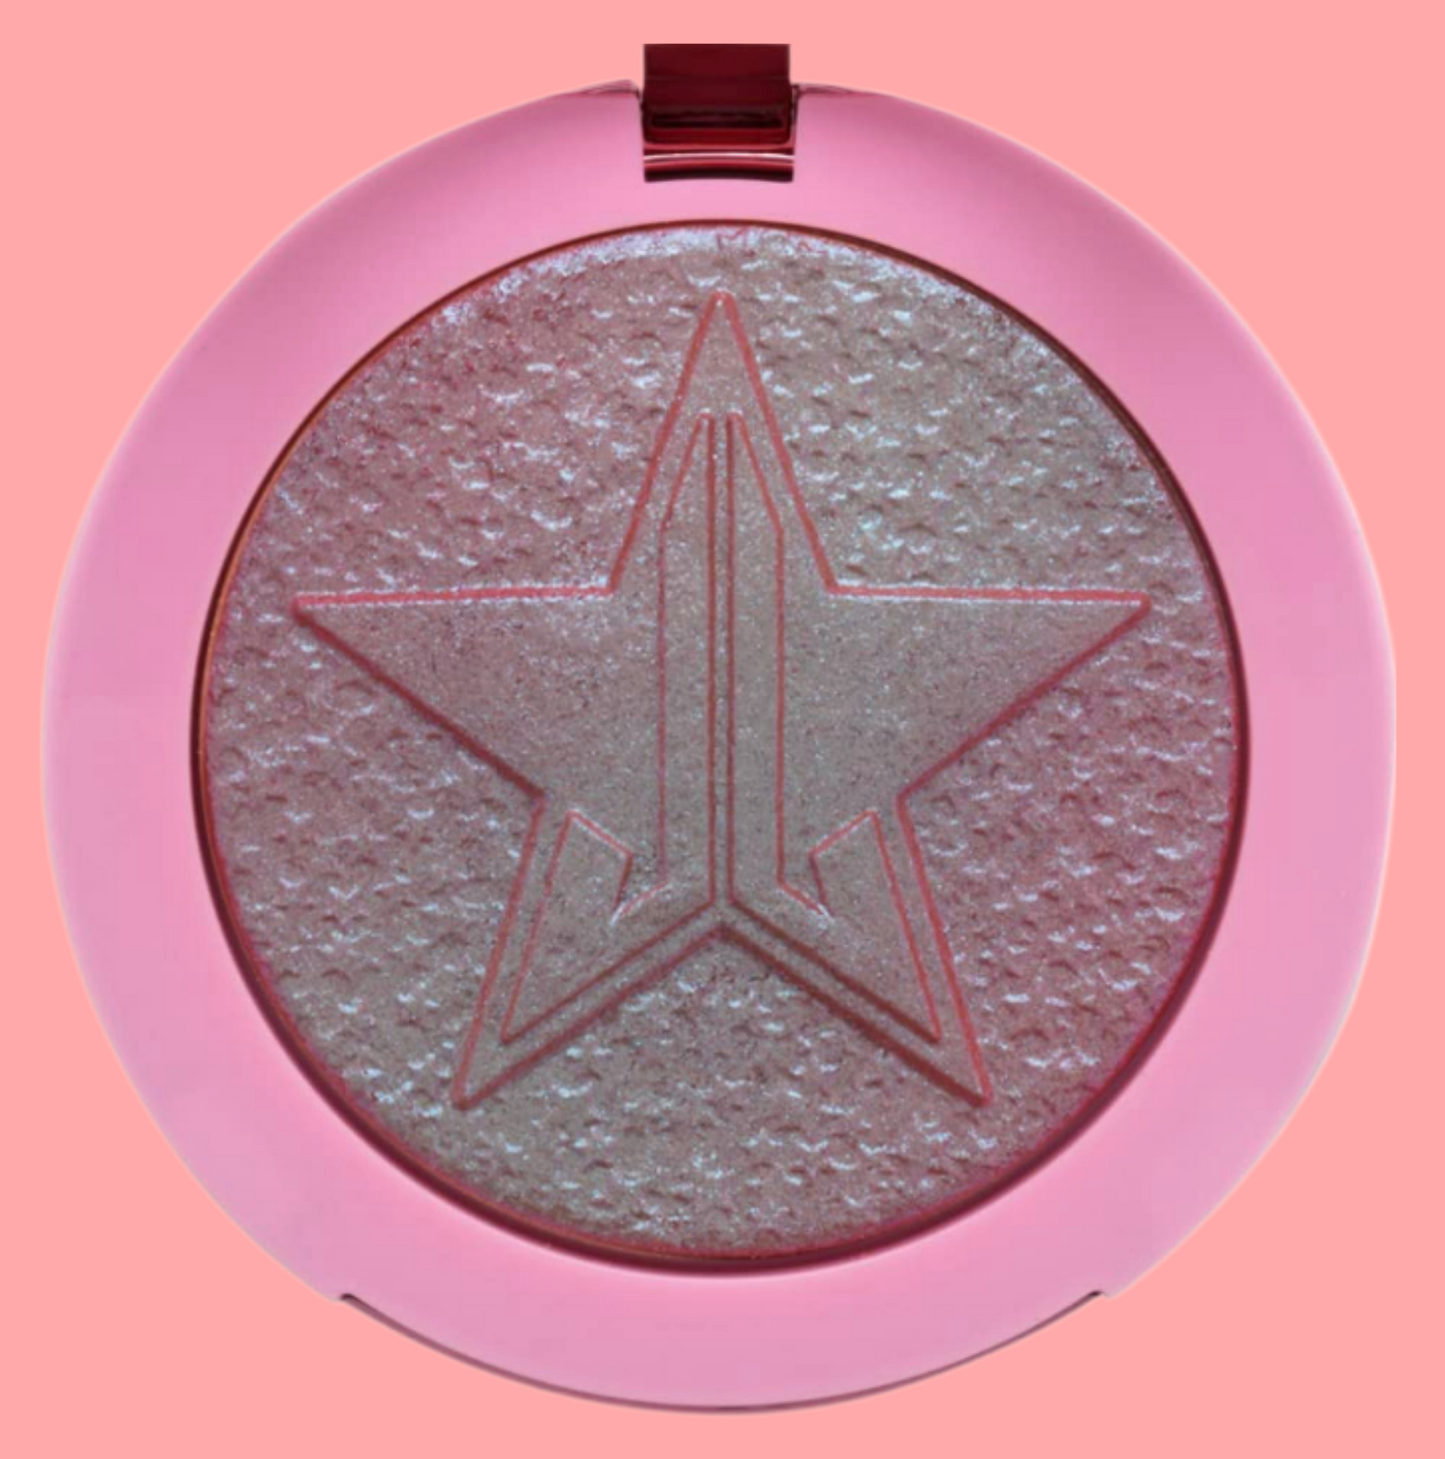 Jeffree Star Cosmetics Supreme Frost Highlighter - Hypothermia